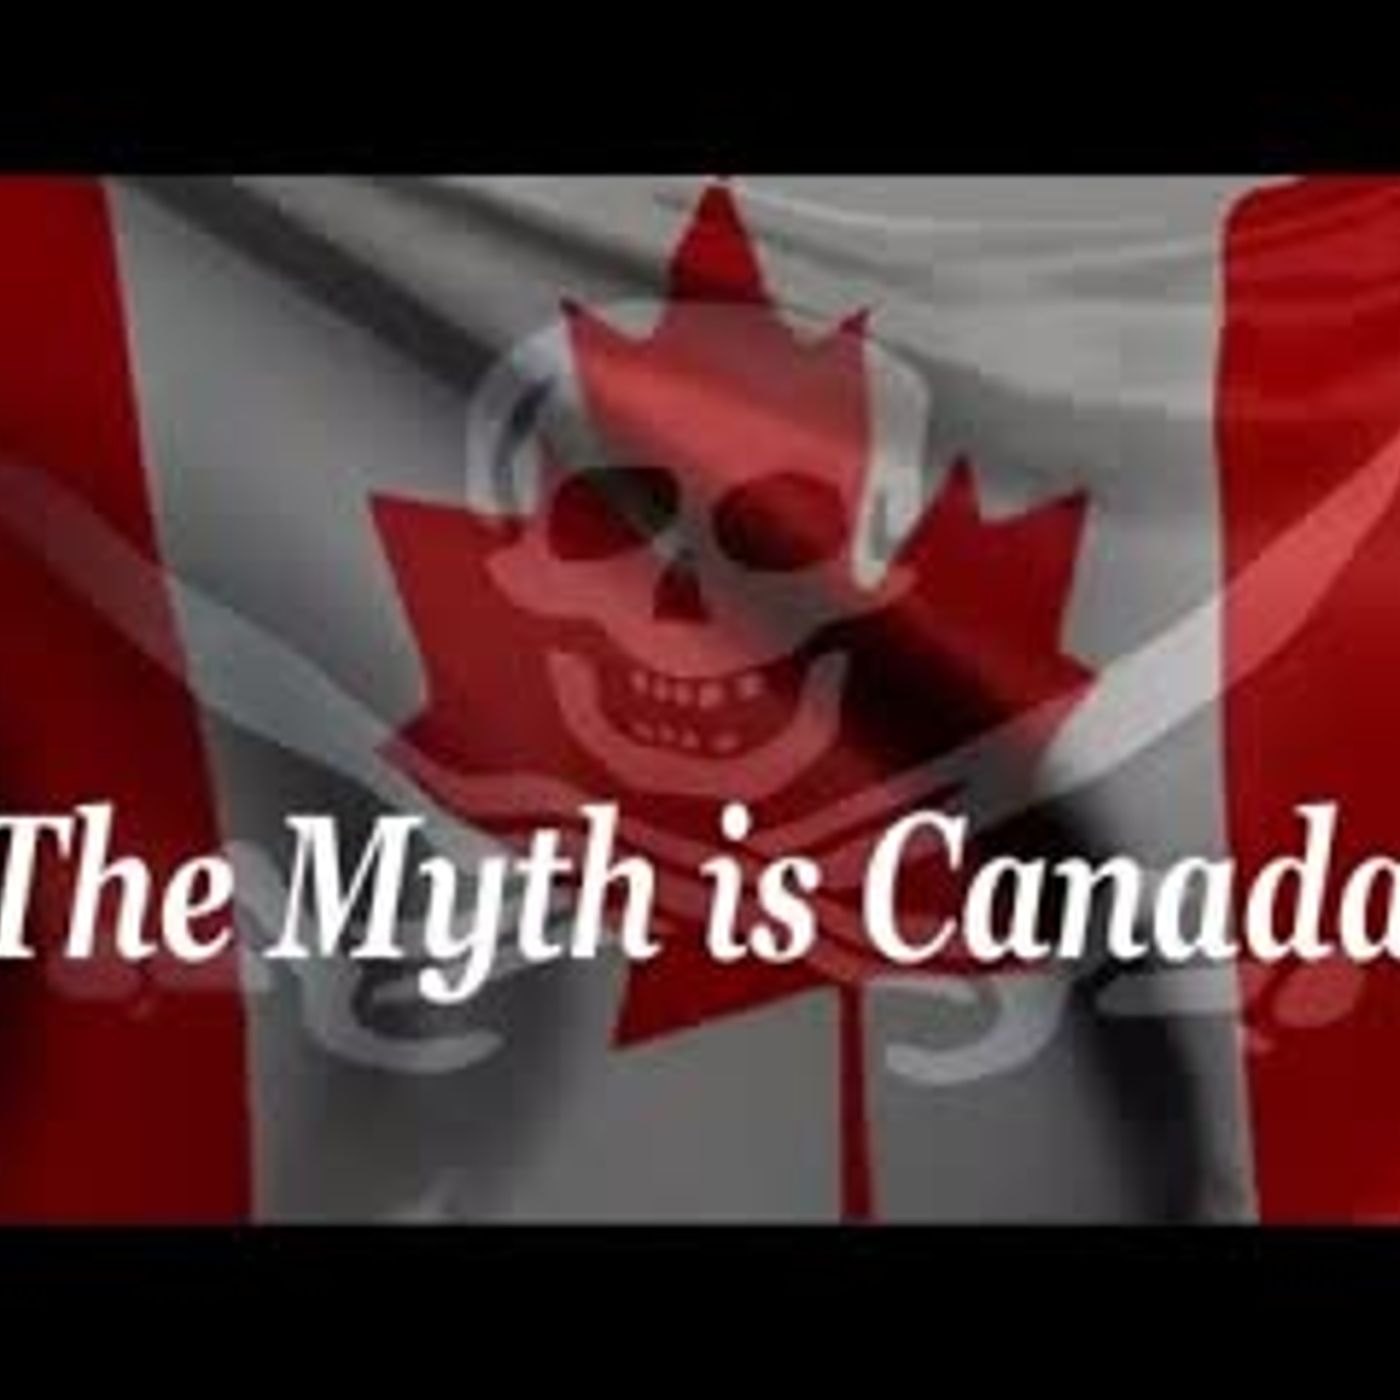 The Myth is Canada A film exposing the truth about Canada's legal and lawful status